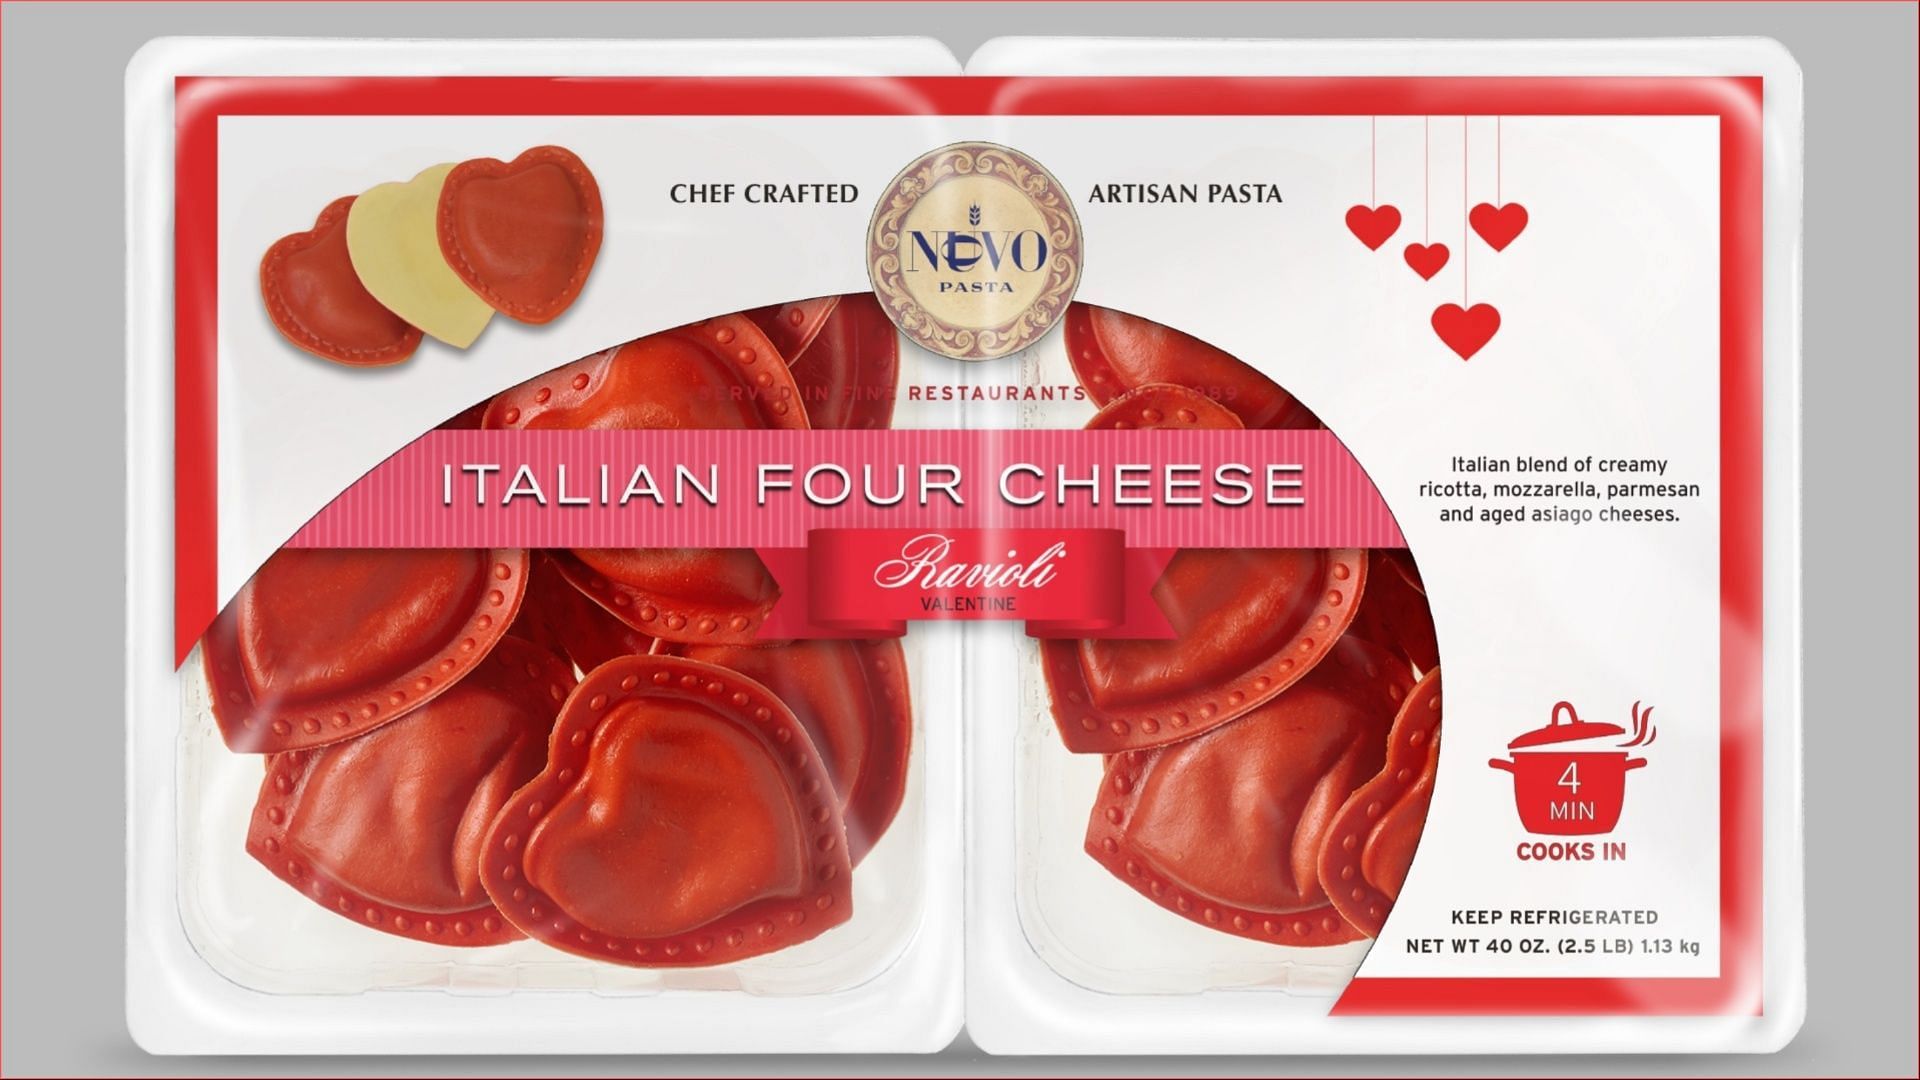 The Nuovo Pasta Heart Ravioli is available at Costco stores nationwide for over $9.99 (Image via Nuovo Pasta)